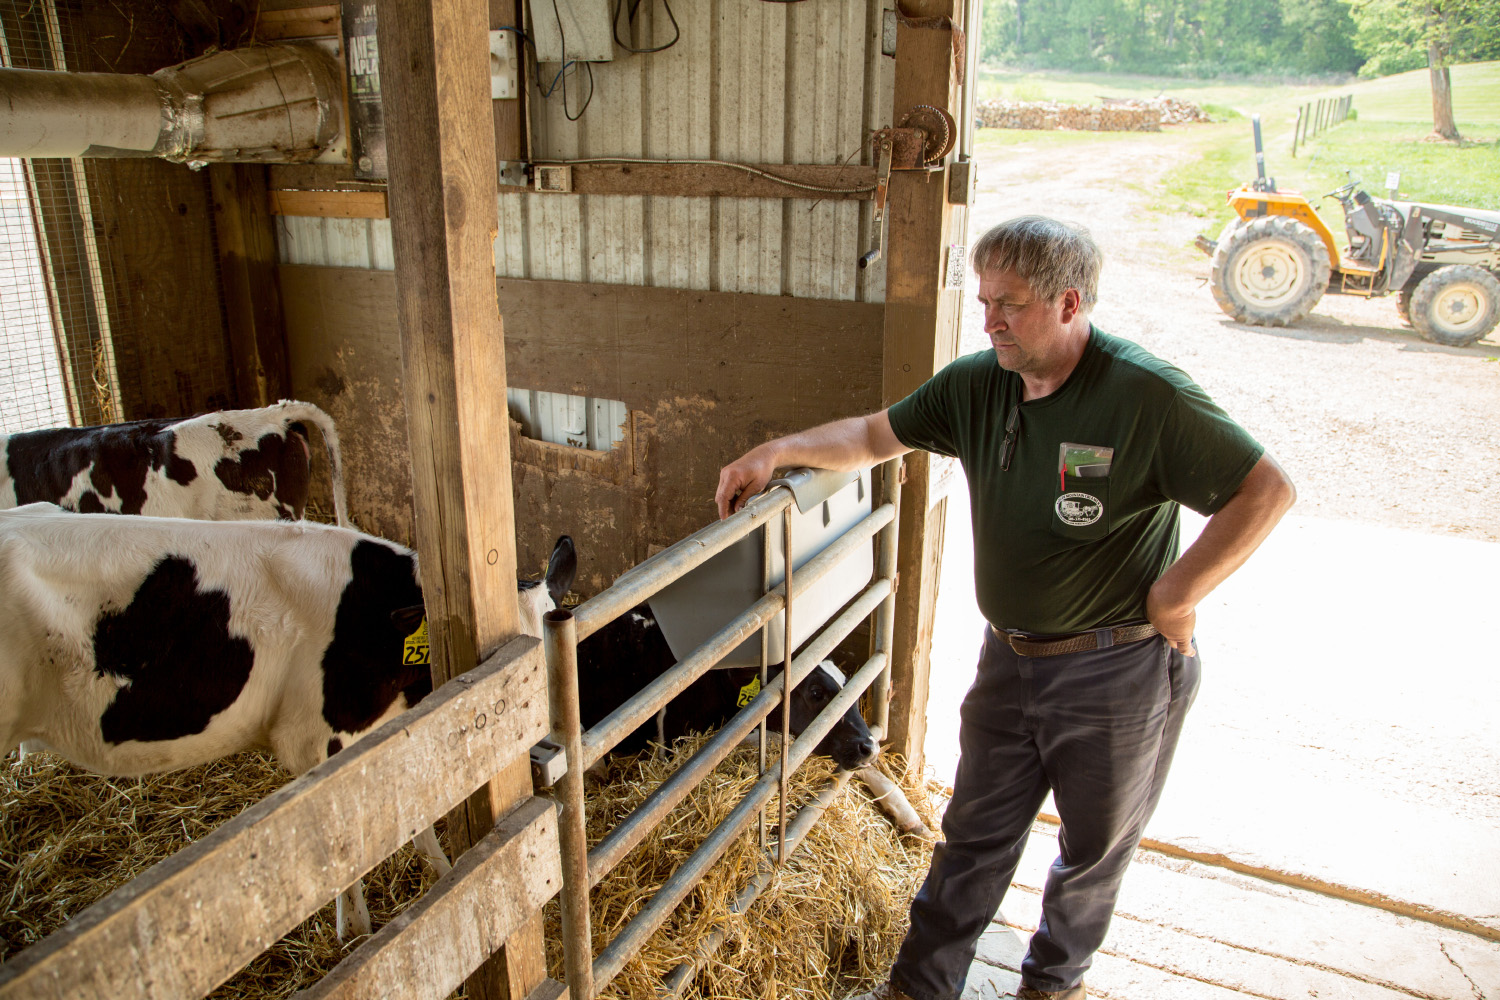 Randy Sowers, who owns a dairy farm in Frederick County, Md., had $60,000 seized by the Internal Revenue Service for structuring violations. Sowers settled with the government and had half returned, but, like Quran, he's working to get the rest of it back. (Photo: Institute for Justice)